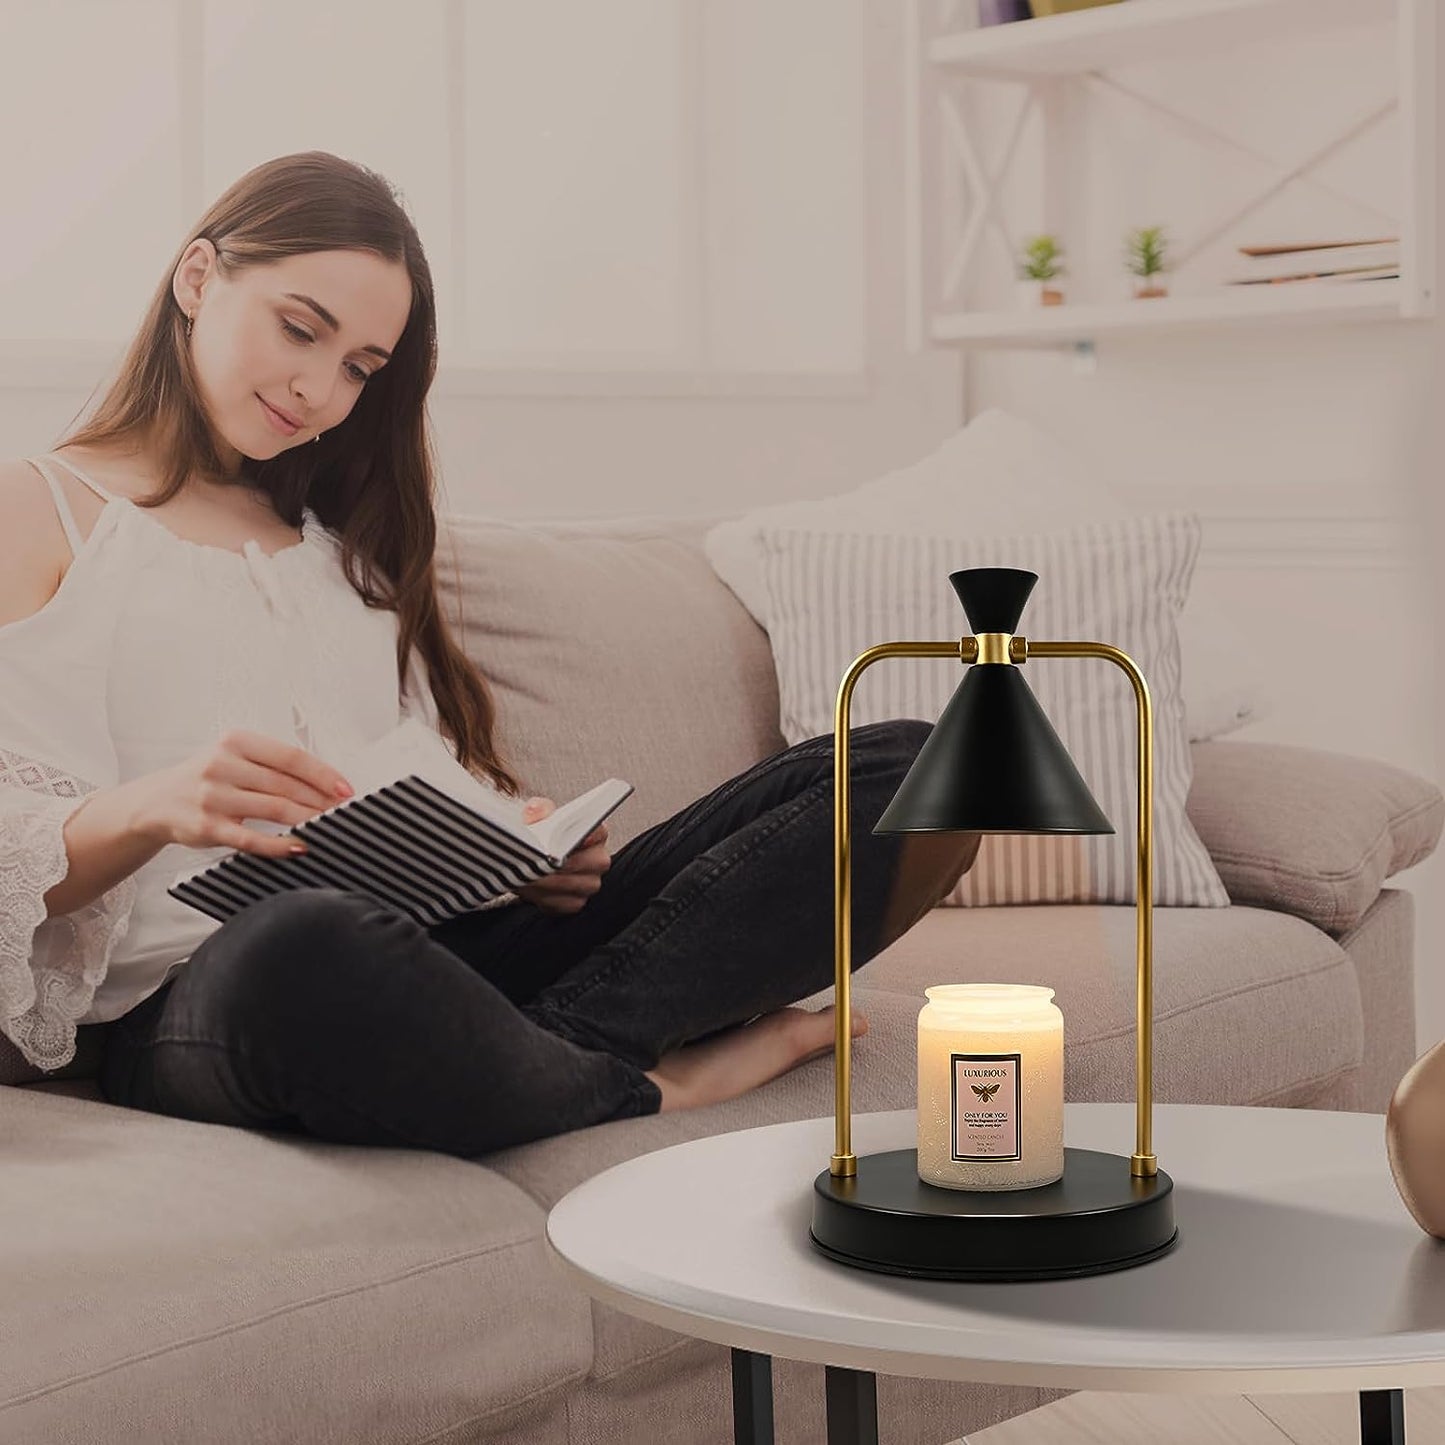 THE Candle Warmer Lamp with 3 Bulbs, Electric Wax Melter Warmer with Timer, Dimmable Candle Warmer Light with White Jar for Small & Large Jar Candles, Aromatic Candle Holders Heater for Home Decor (Black)